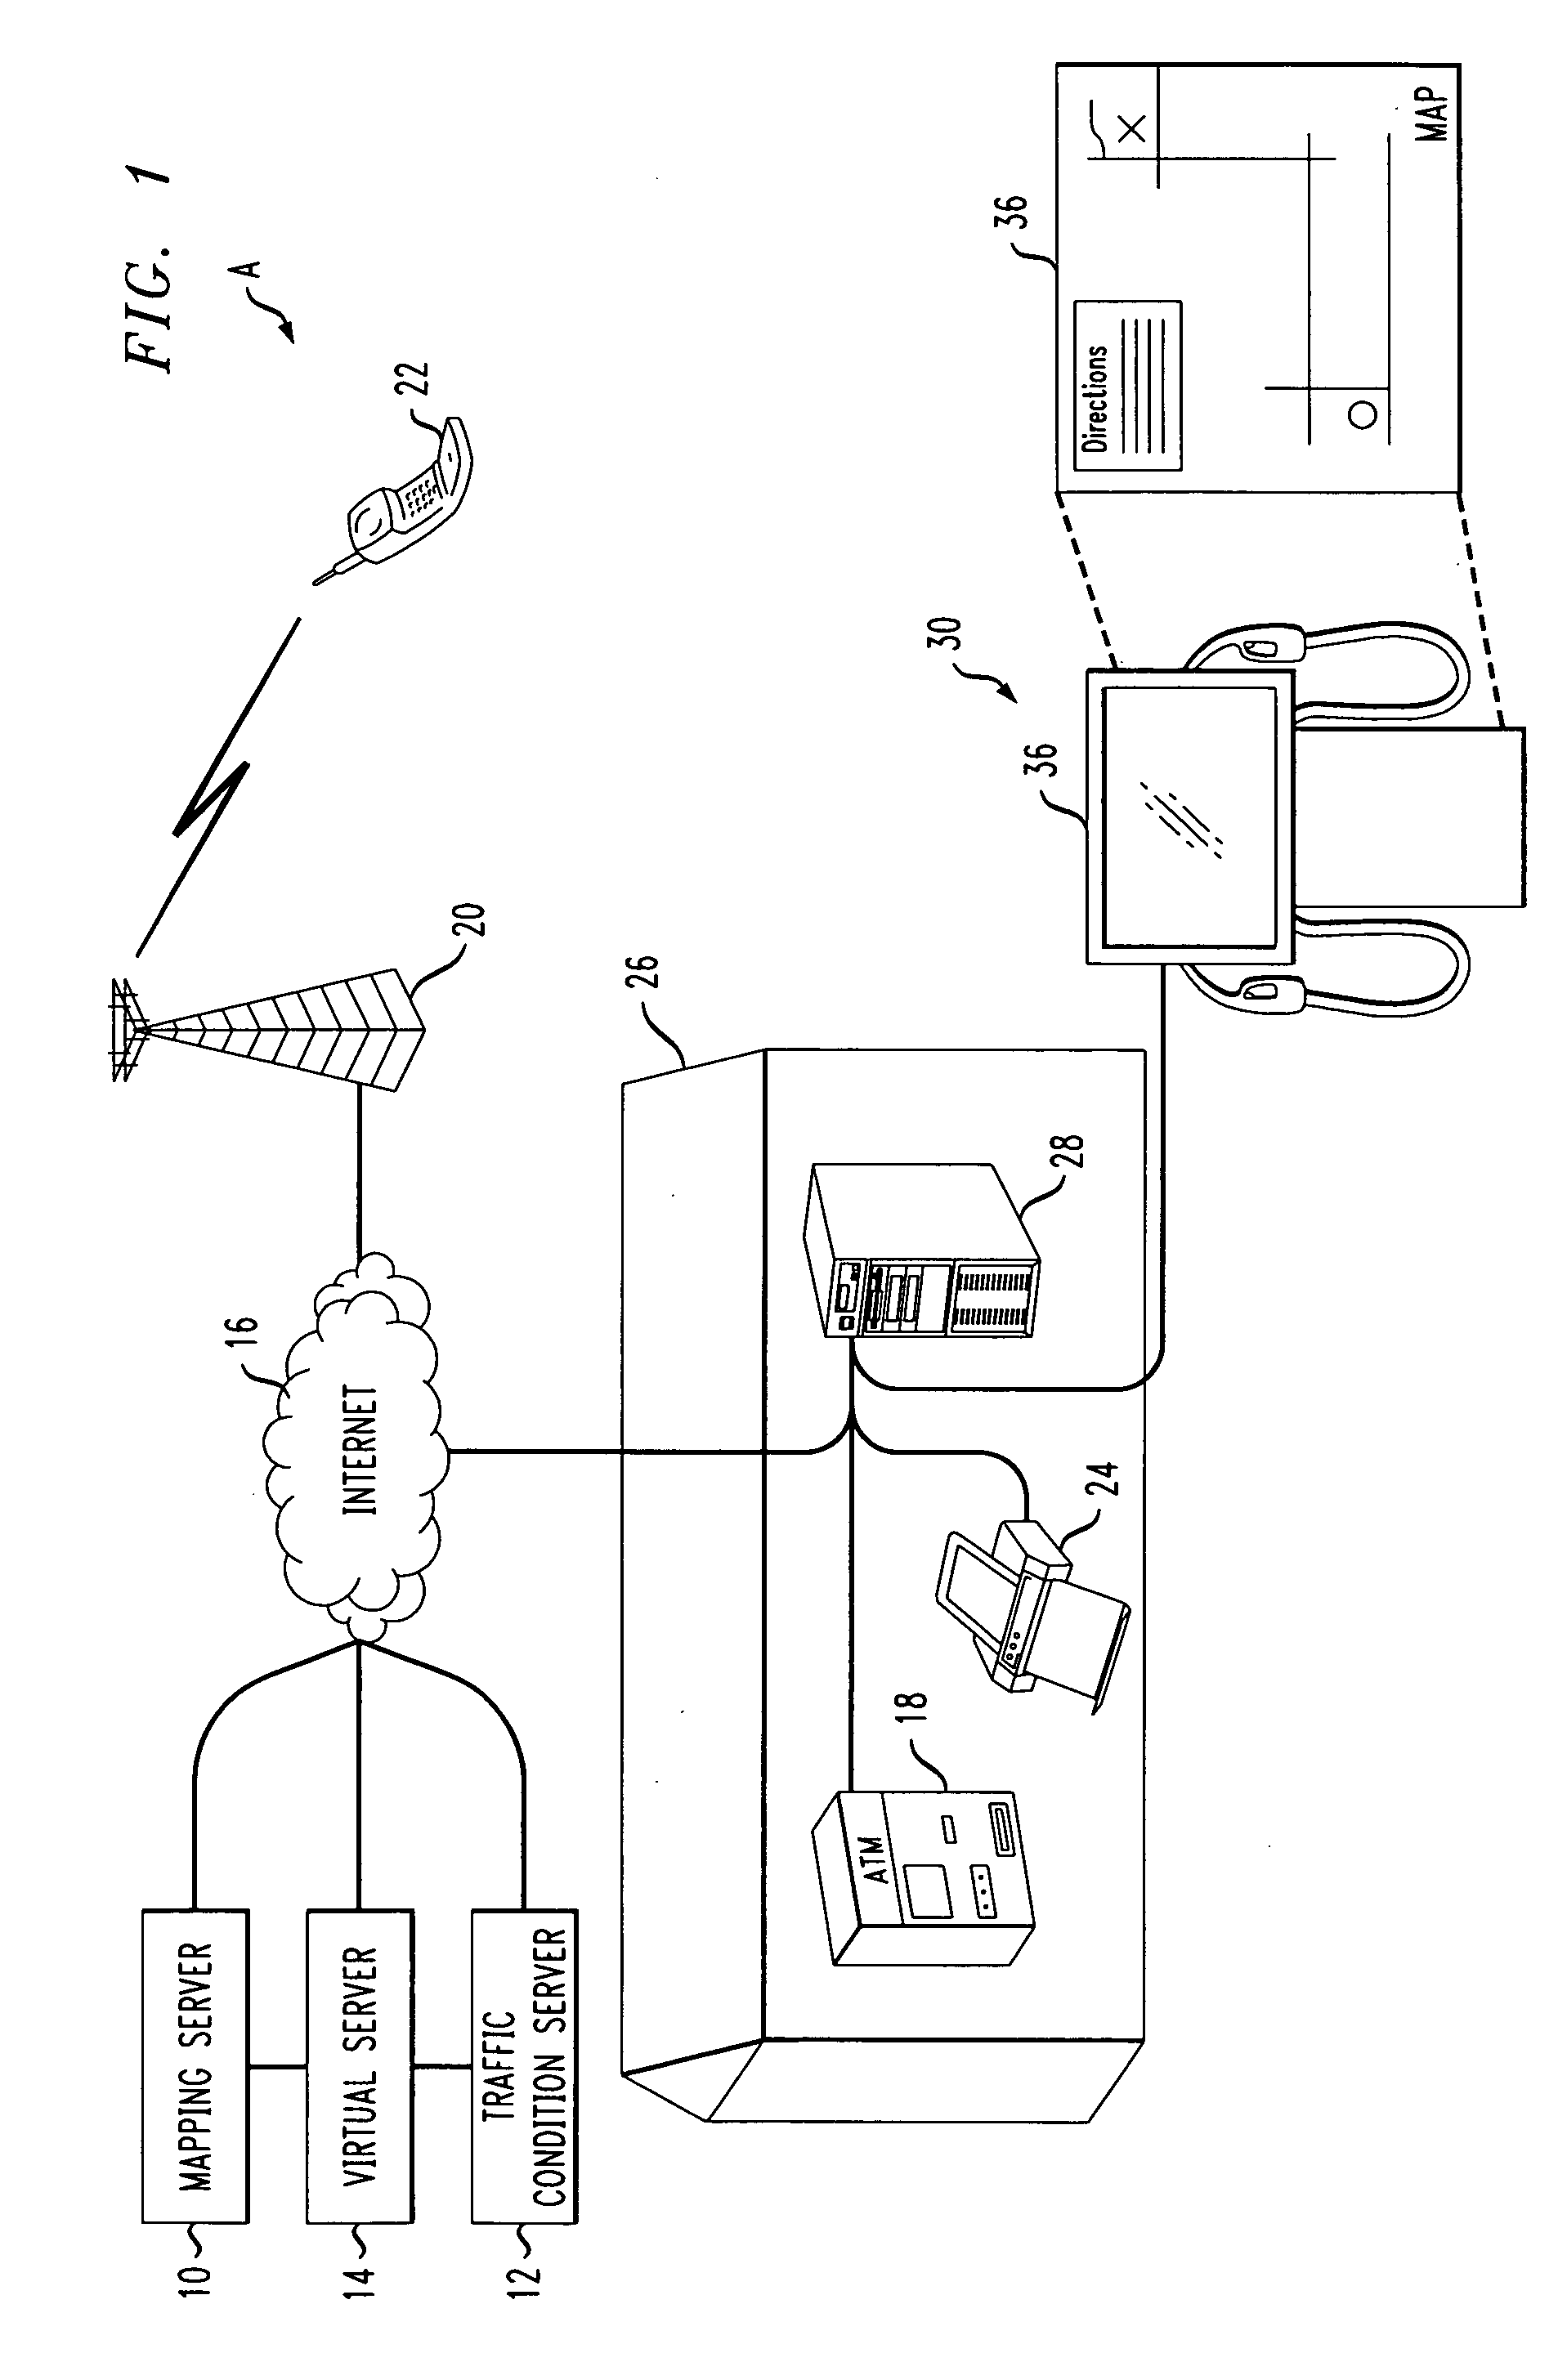 Method and apparatus for emergency map display system